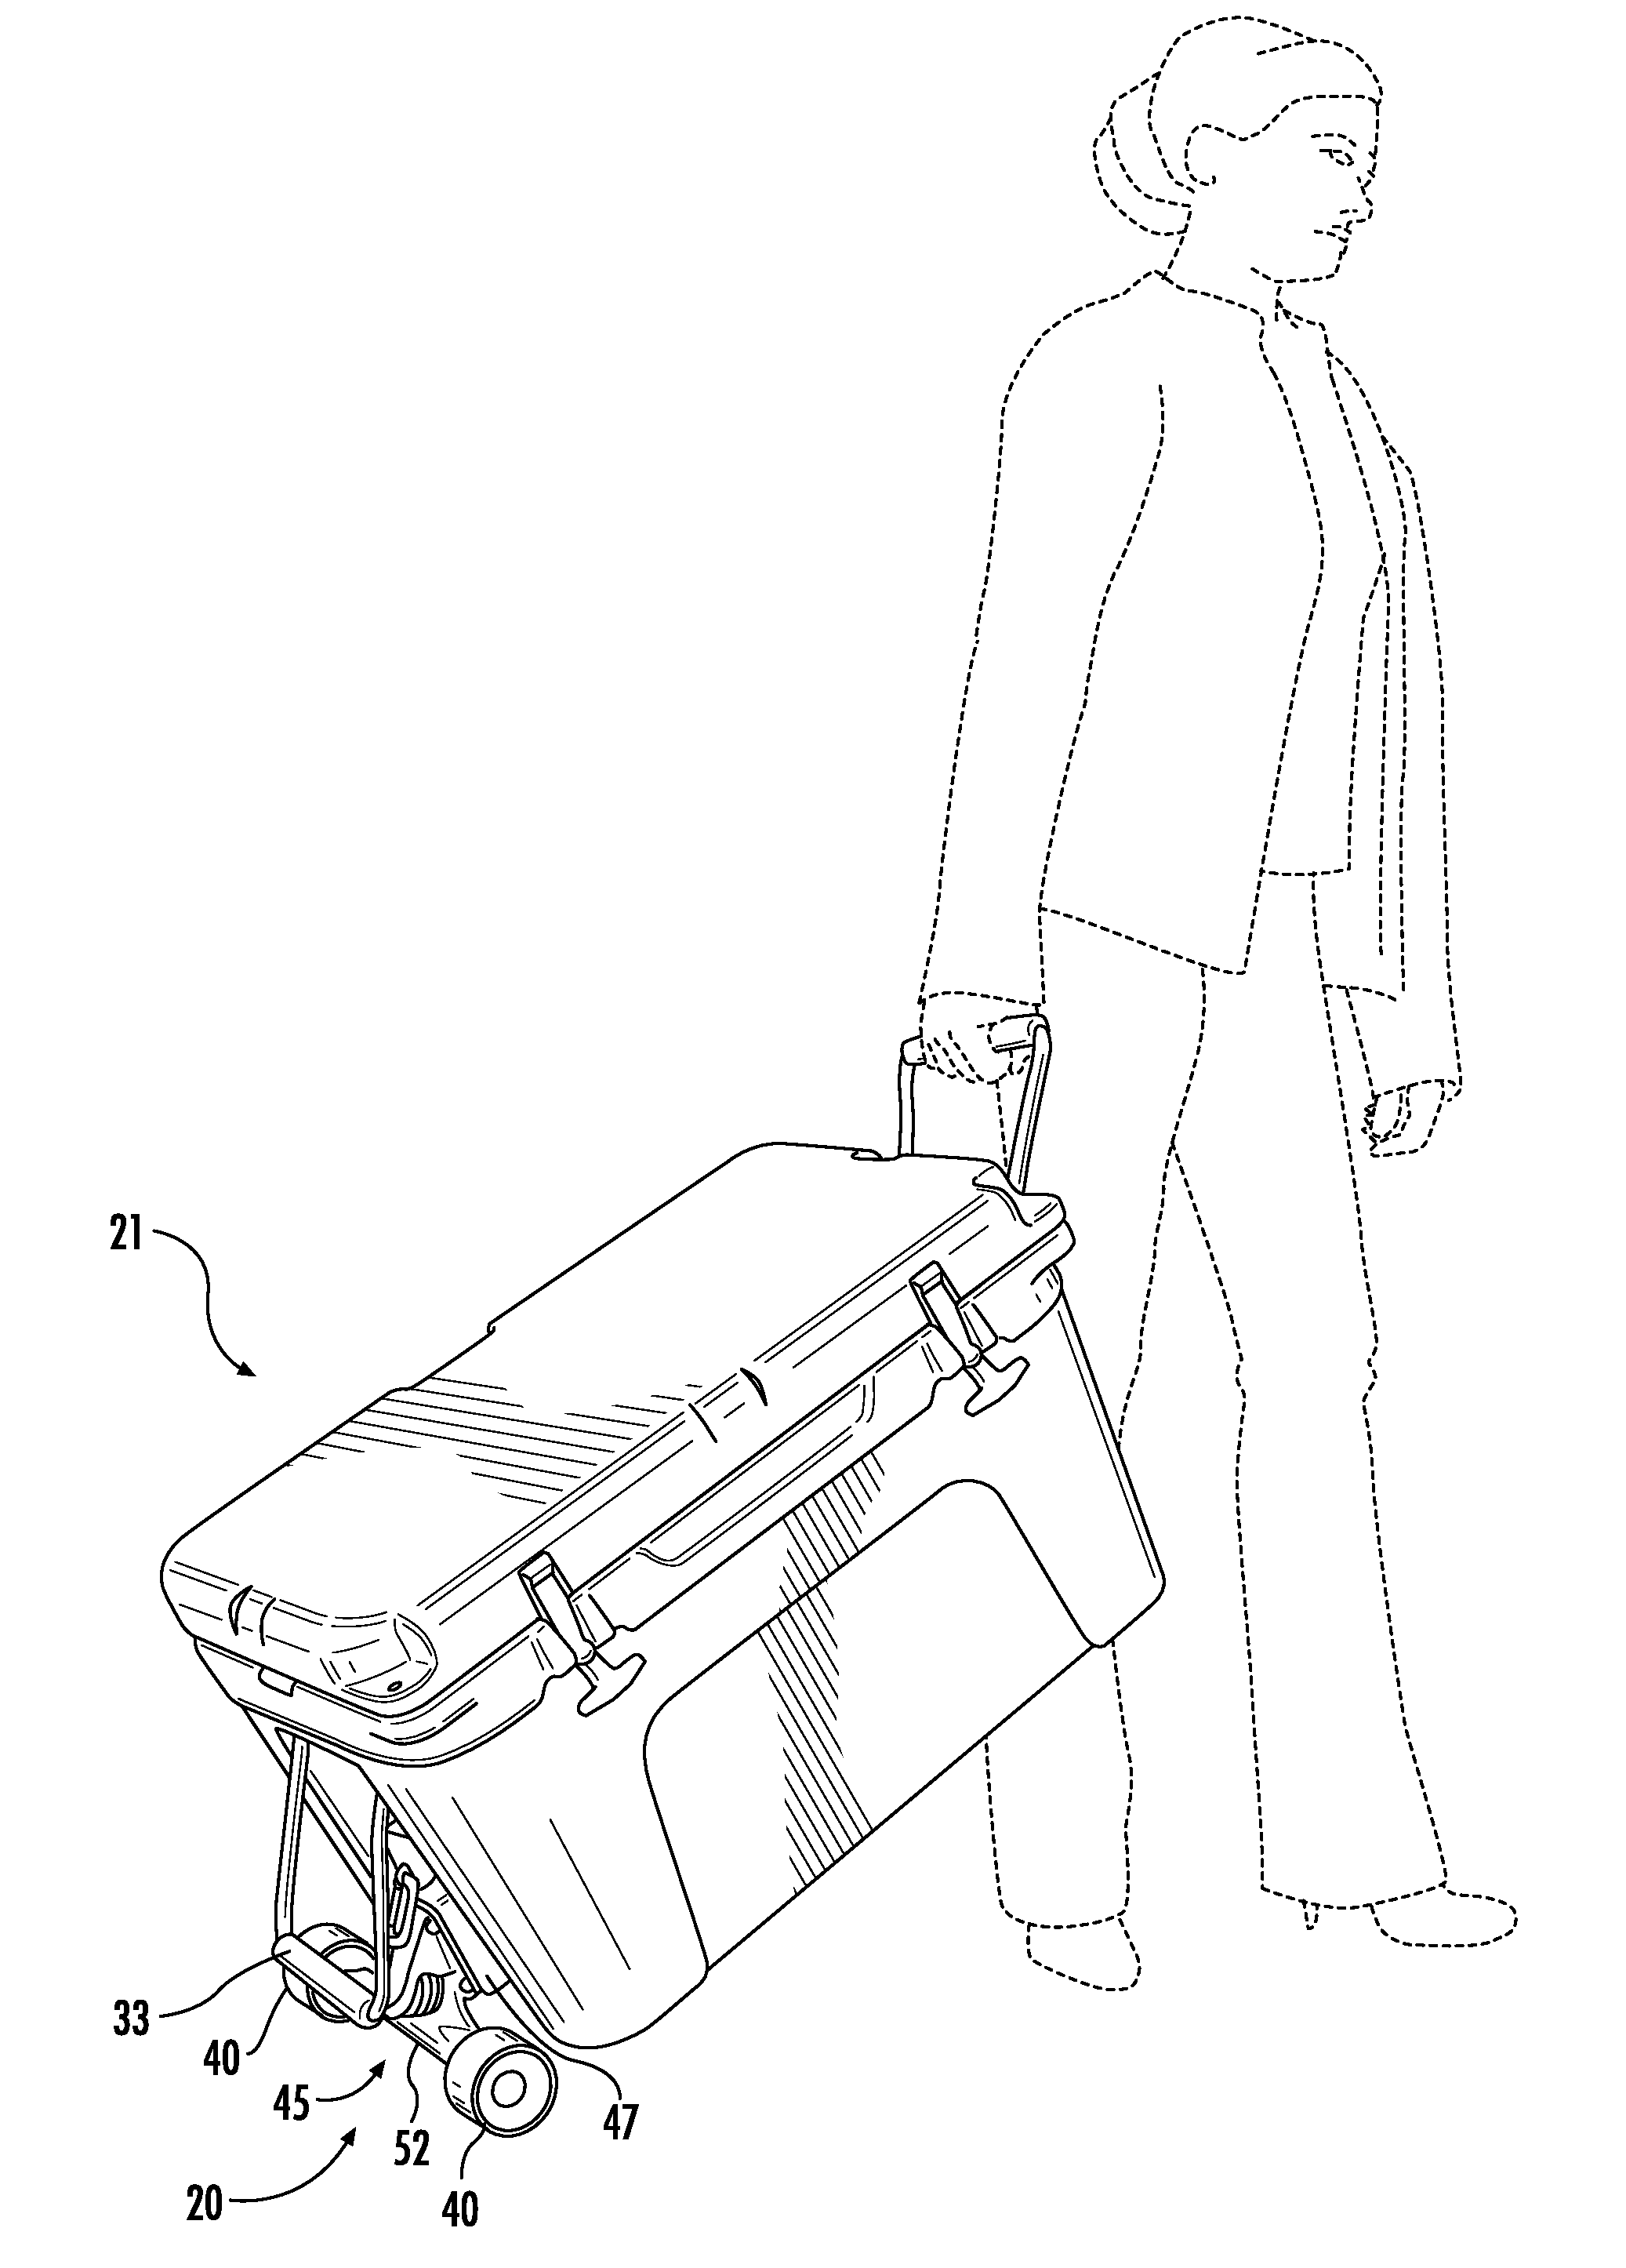 Cooler transporting device